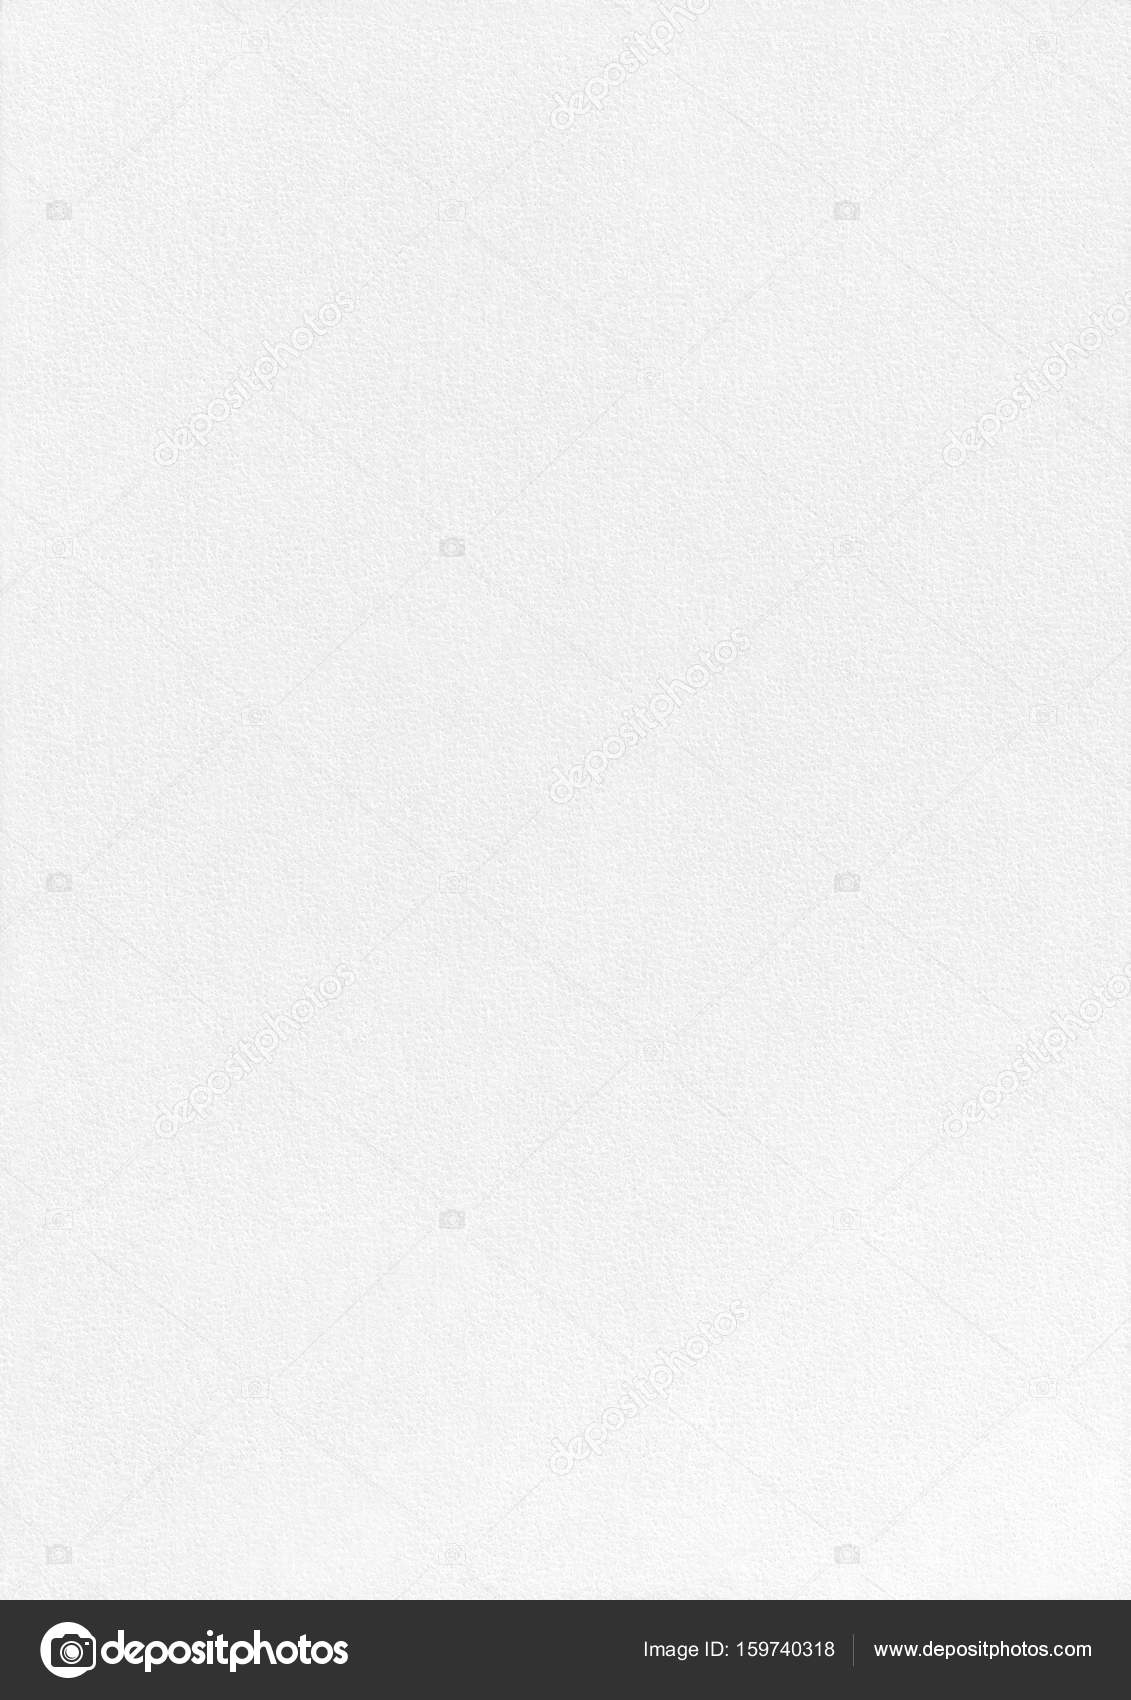 Granular white paper corrugated texture background. Stock Photo by  ©sanches812 159740318